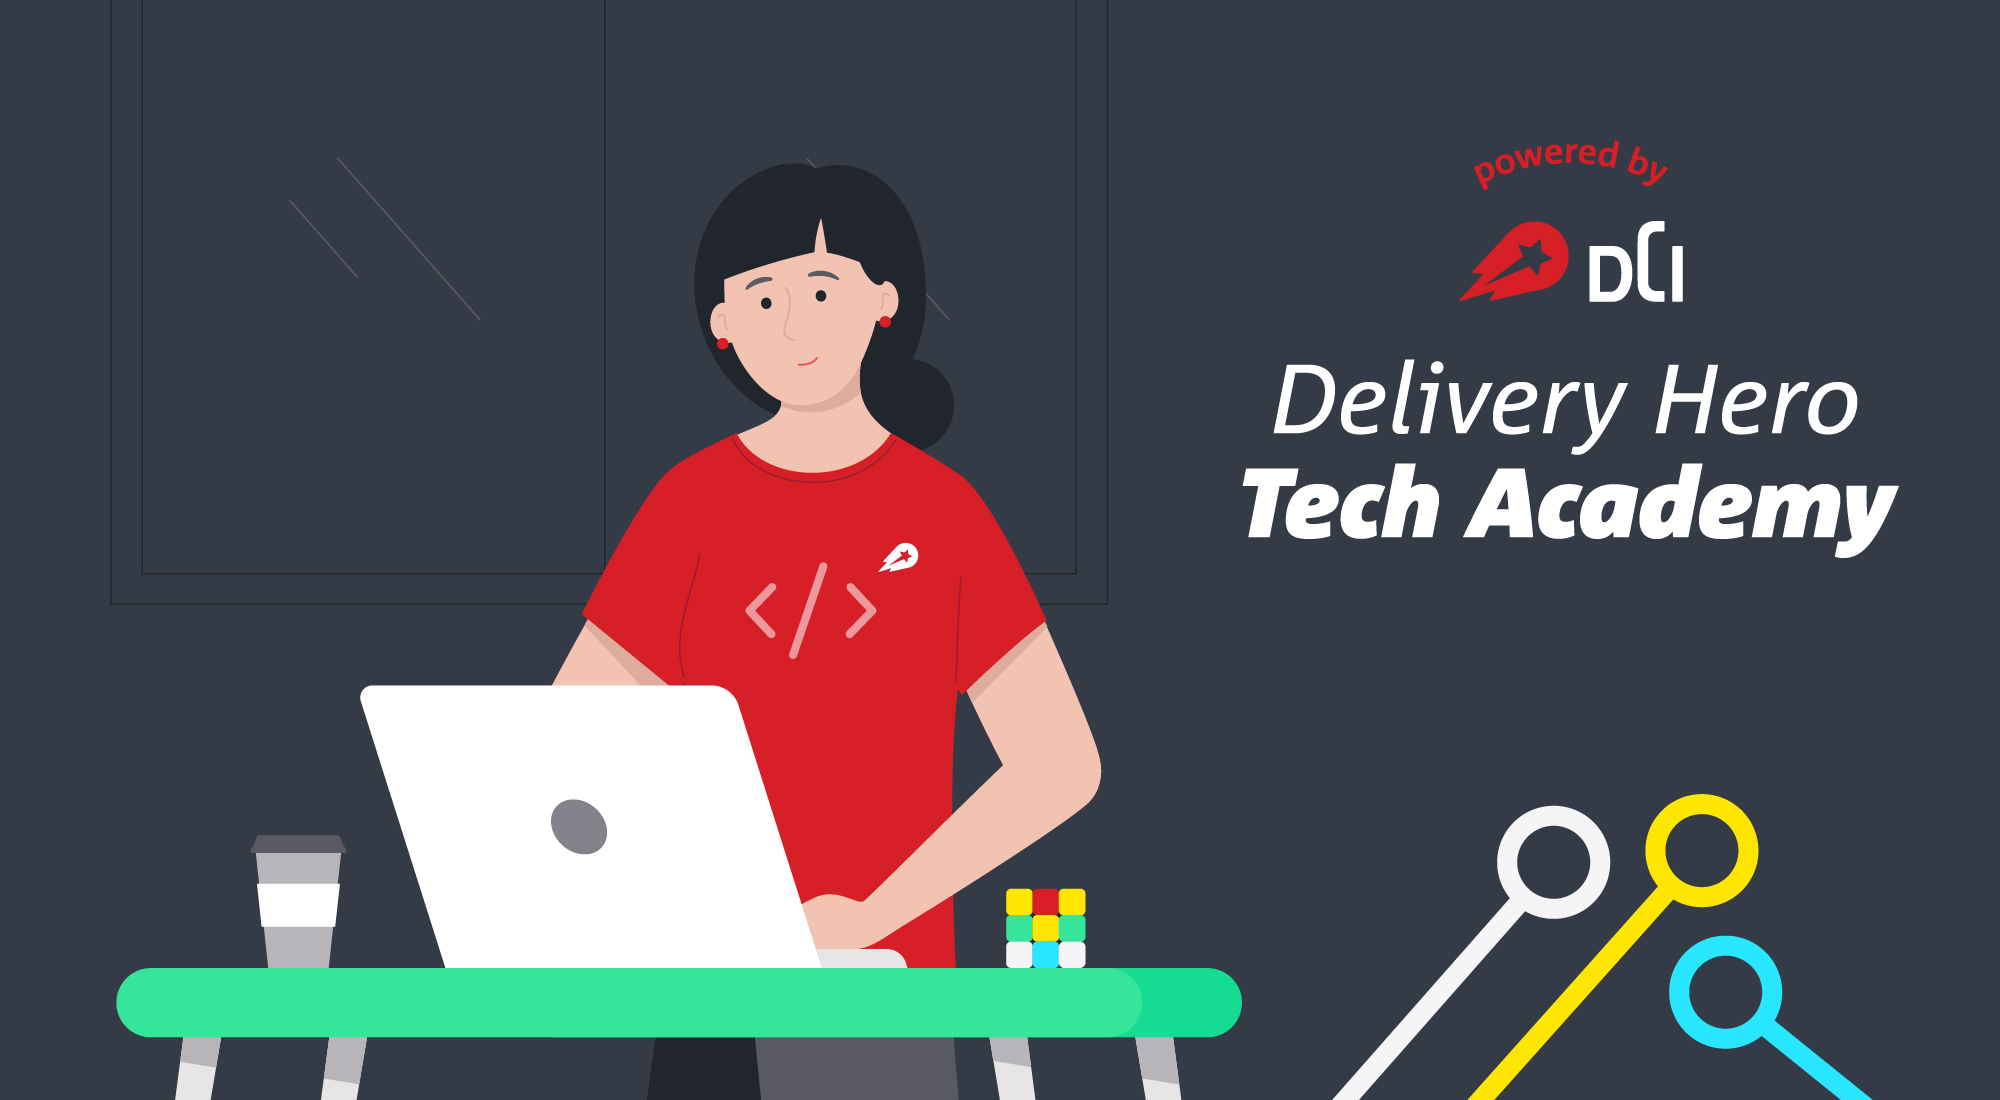 7 things to know about the Delivery Hero Tech Academy